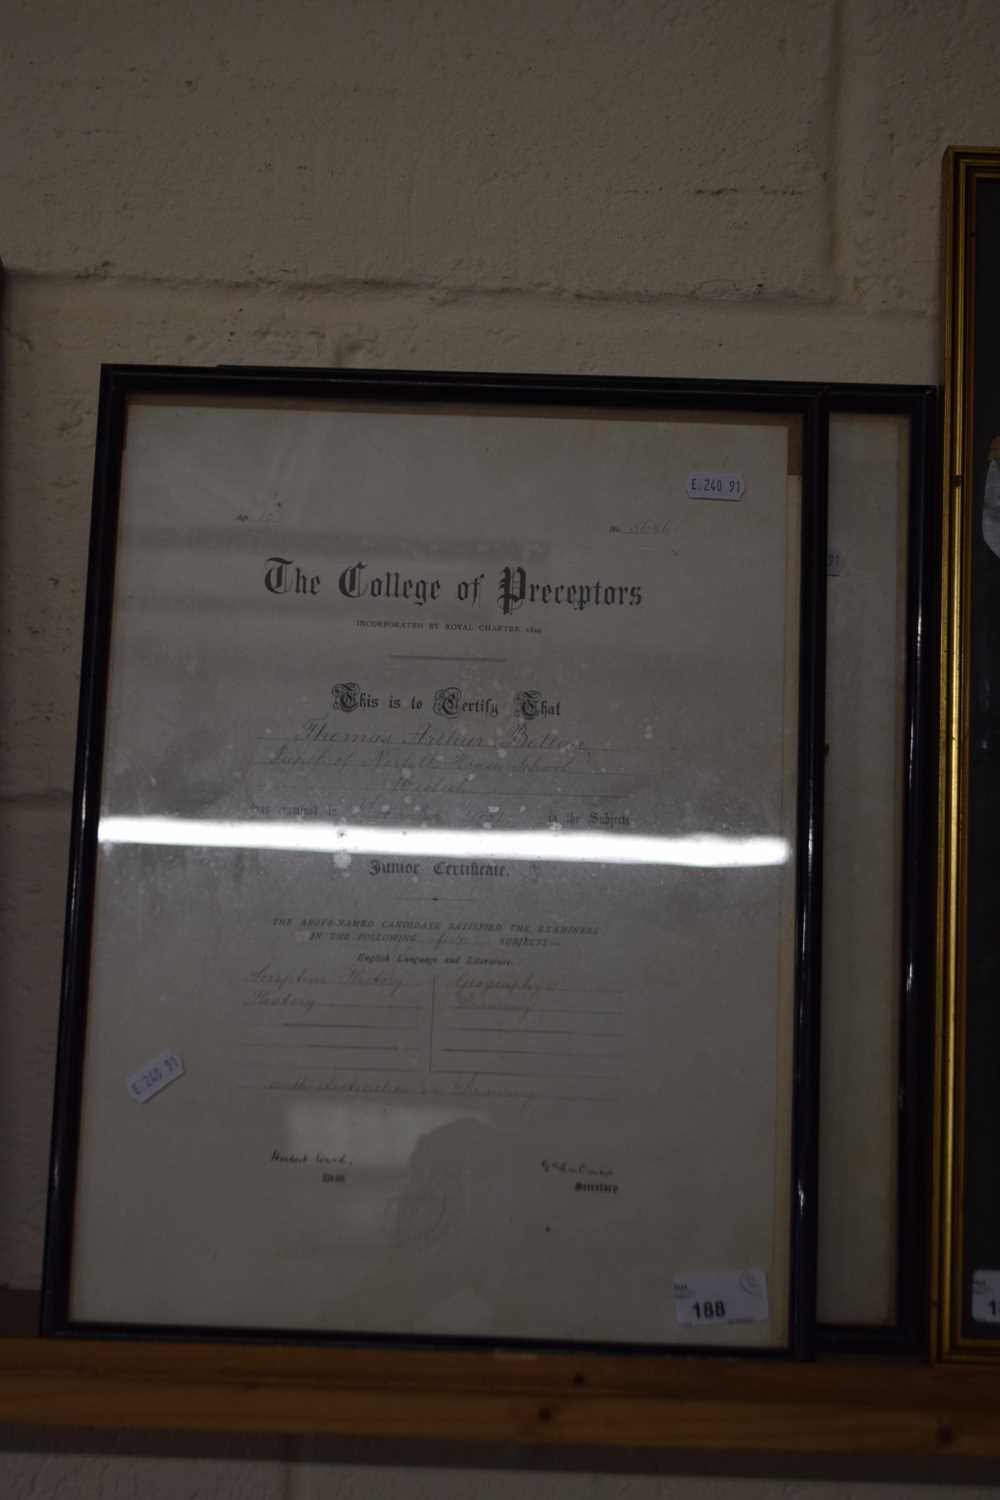 The College of Preceptors - Two framed certificates